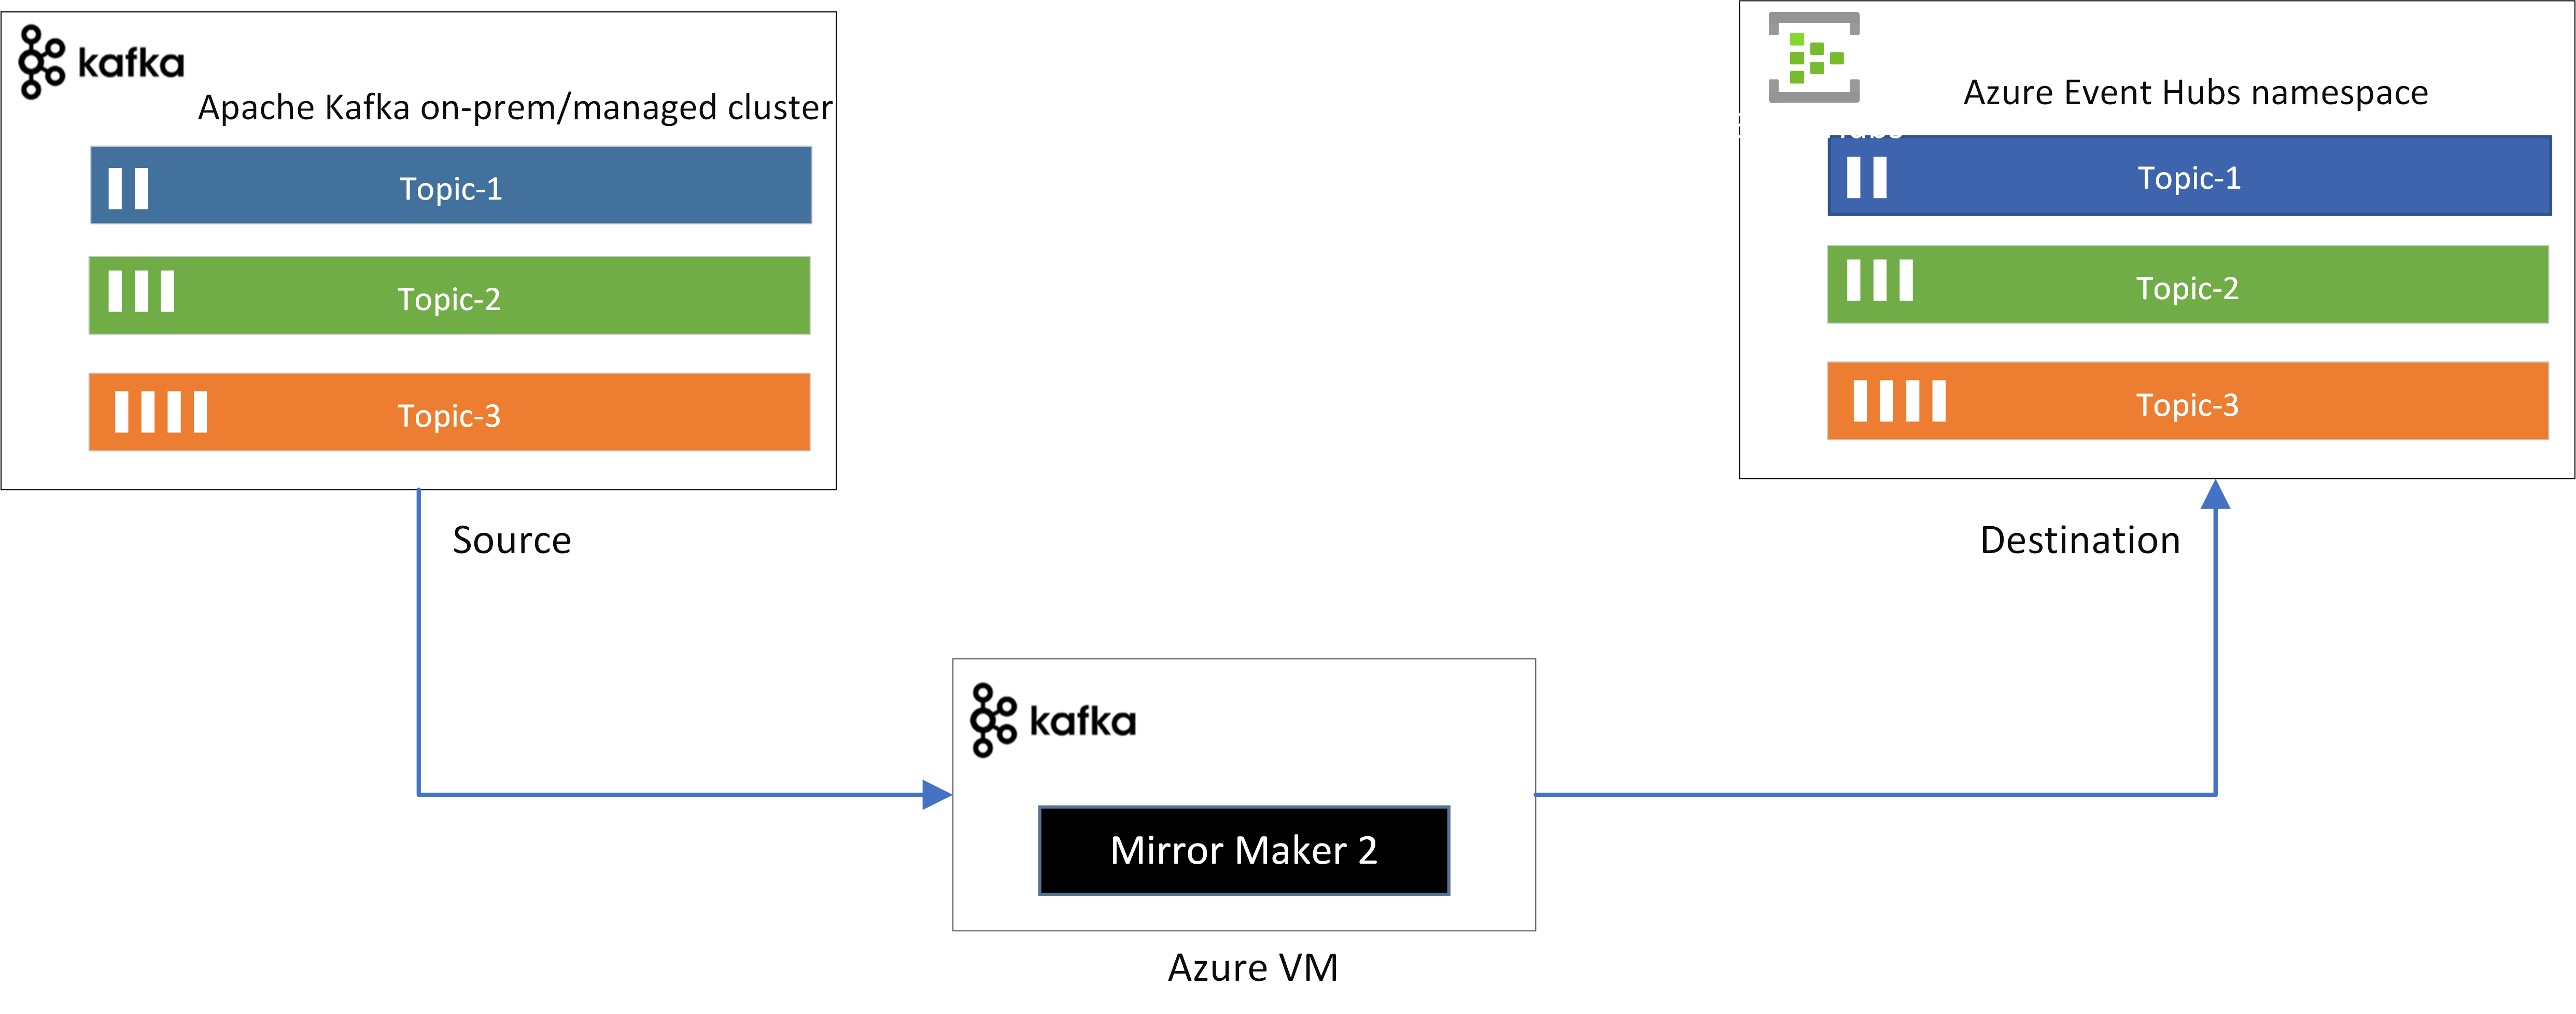 Image showing the flow of events from Kafka MirrorMaker to Event Hubs.